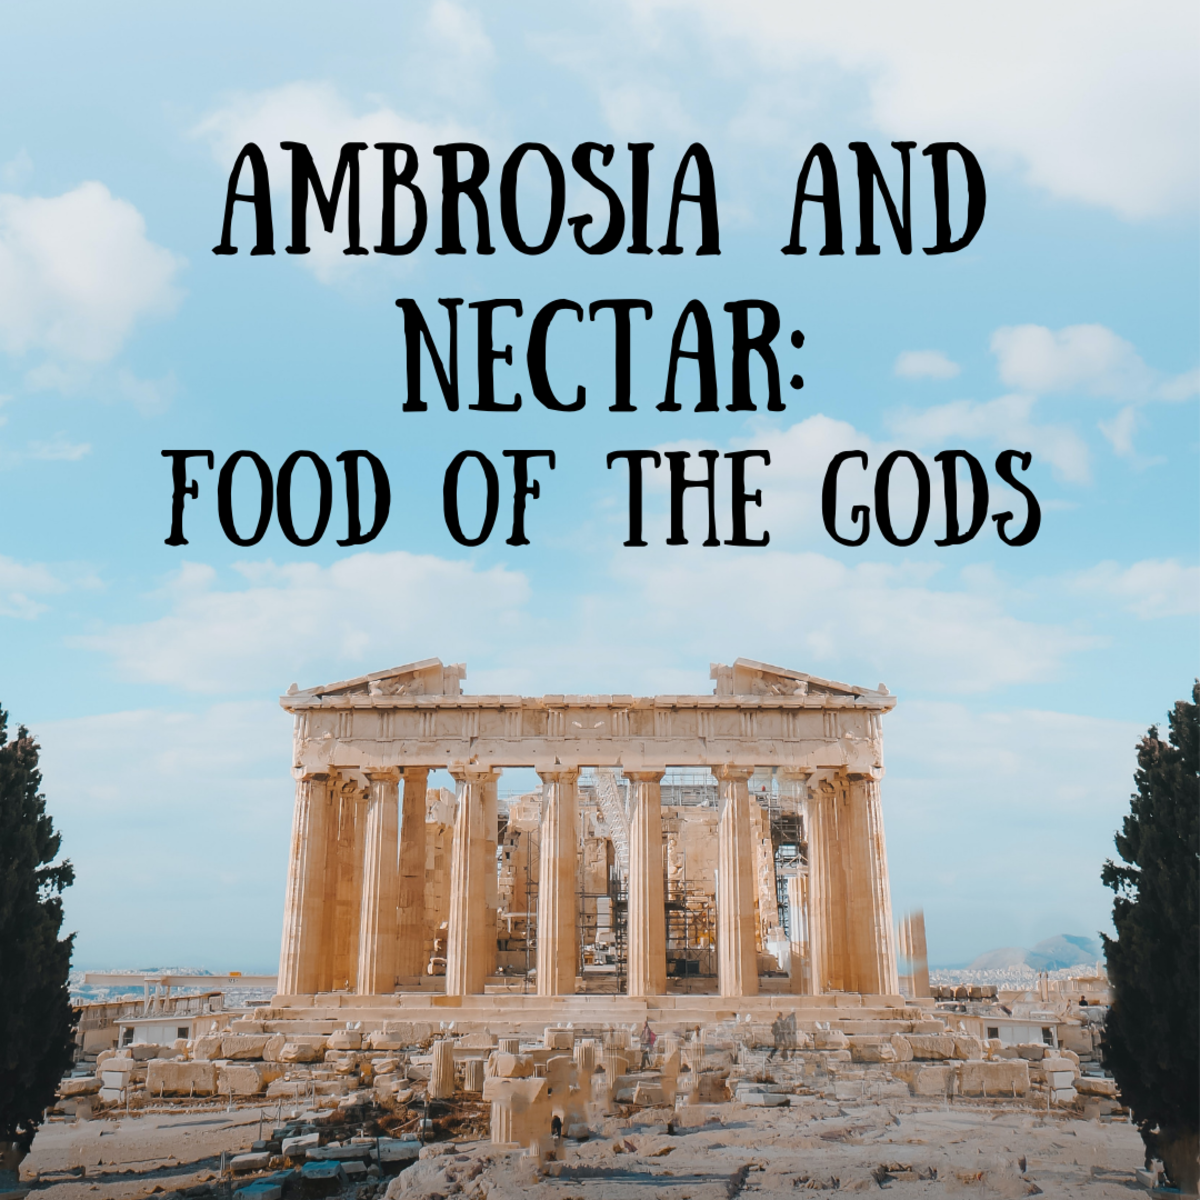 Ambrosia and Nectar: Food and Drink of the Gods